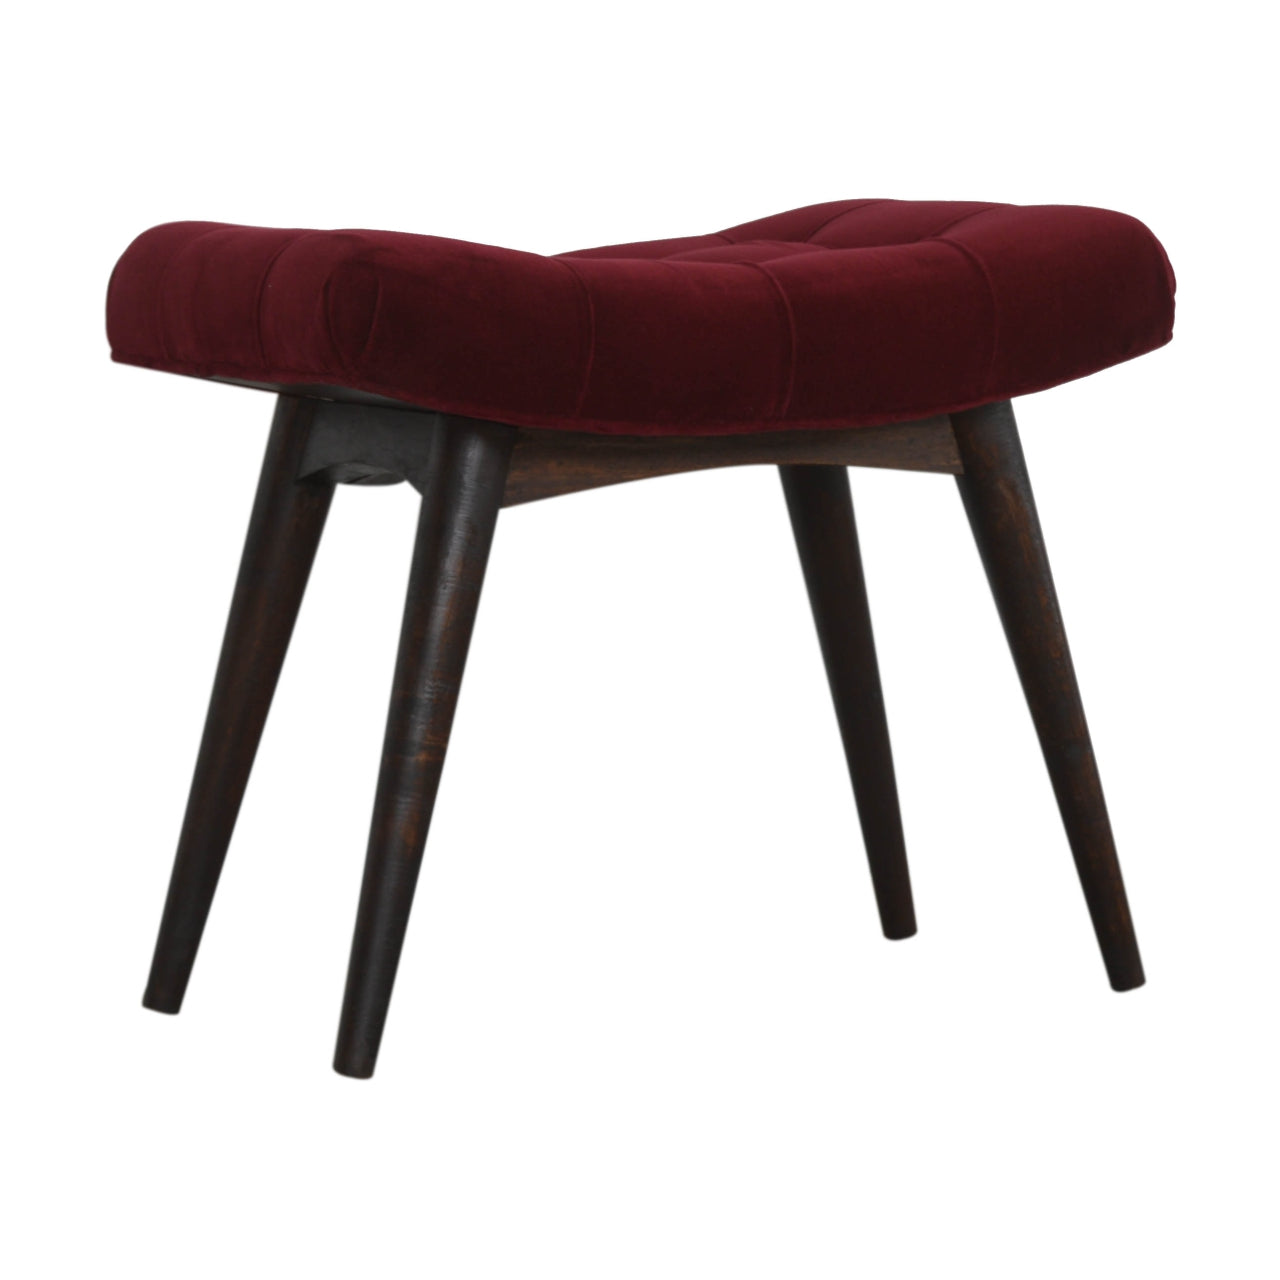 View Wine Red Cotton Velvet Curved Bench information